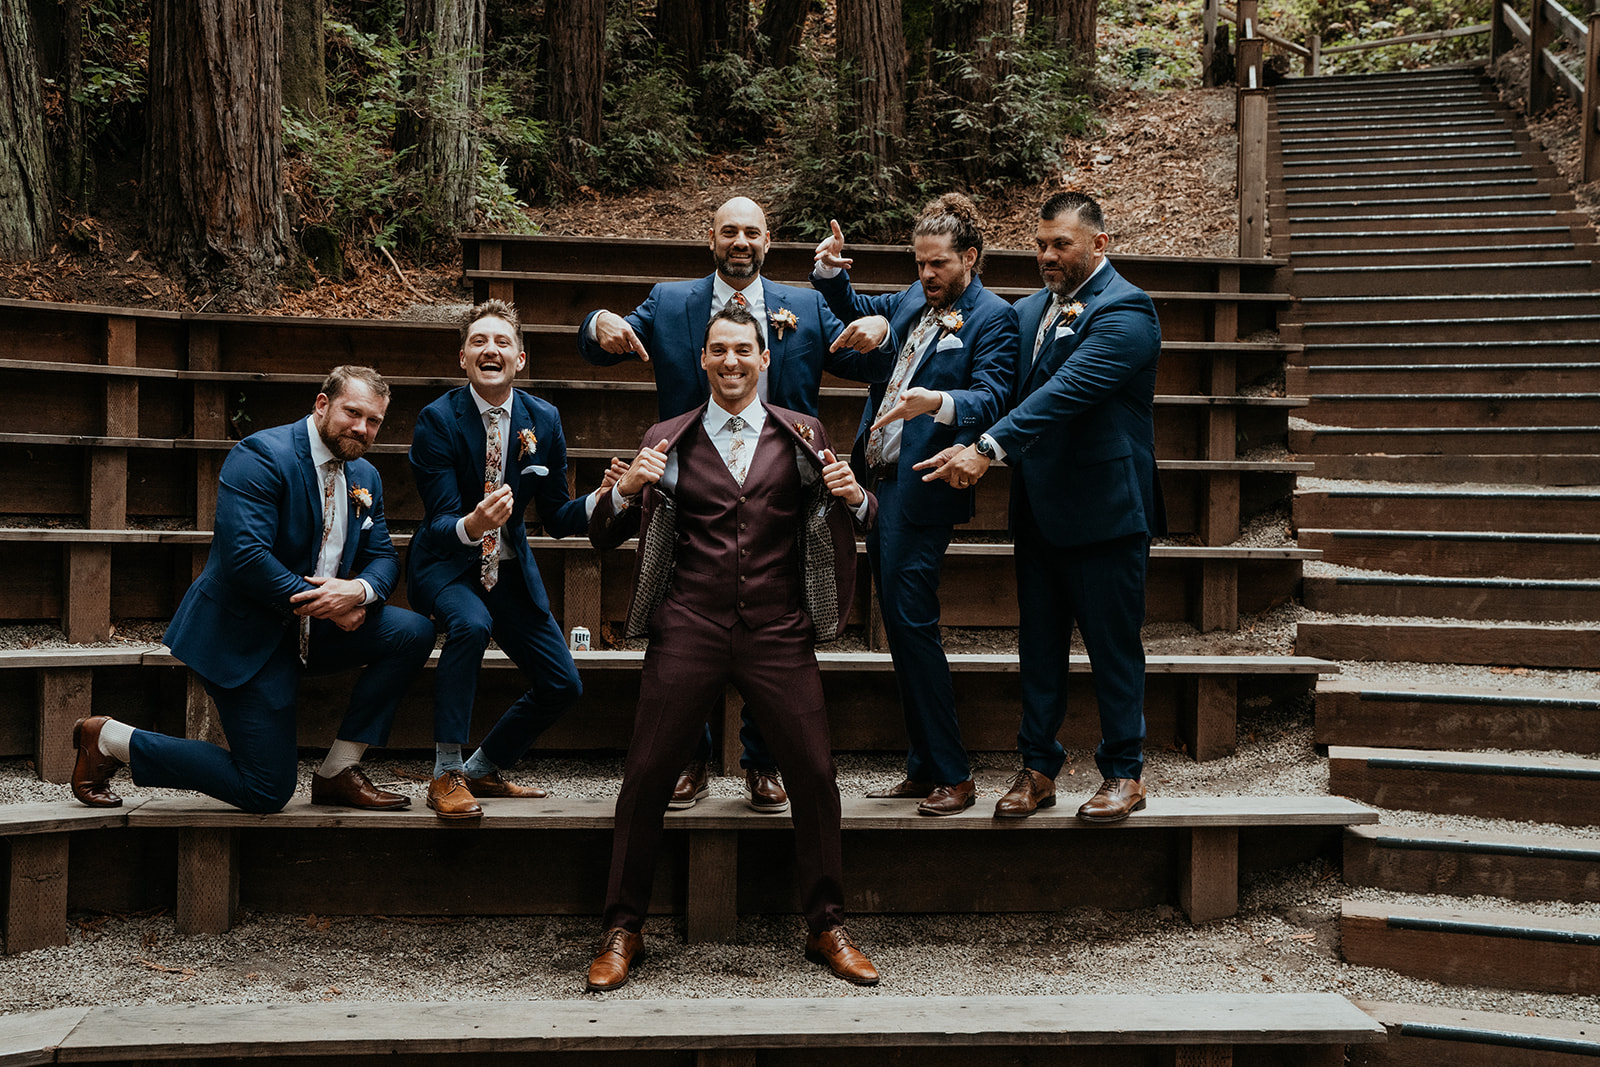 Groom and groomsmen photos from a fall redwood forest California wedding at Kennolyn Camps